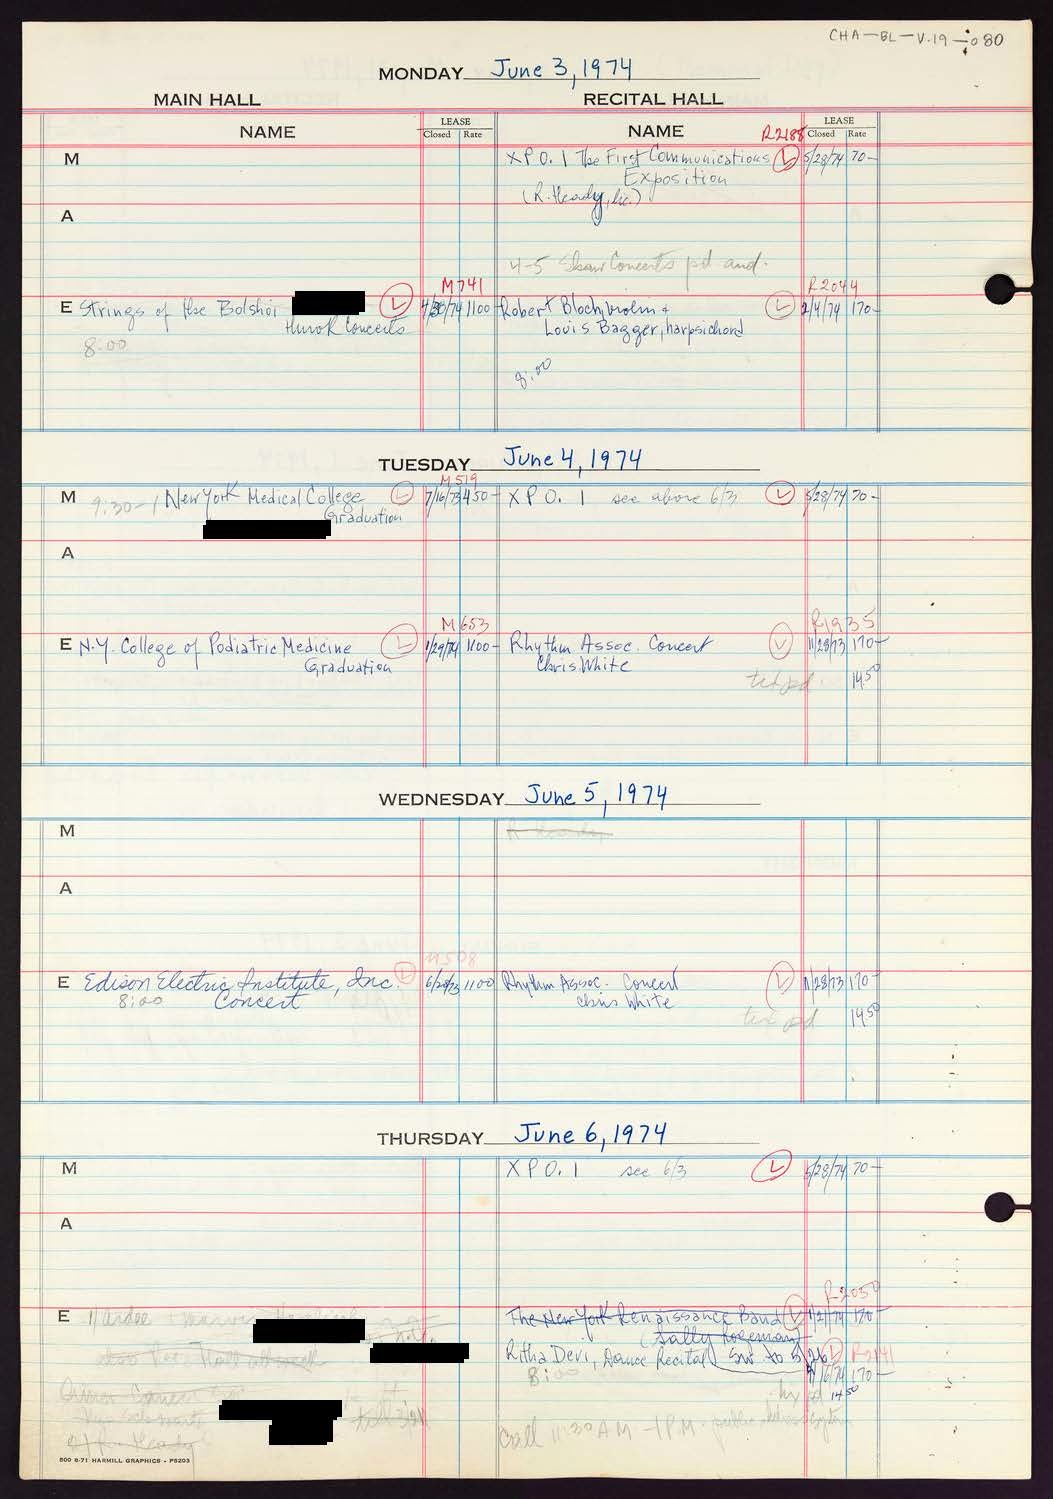 Carnegie Hall Booking Ledger, volume 19, page 80